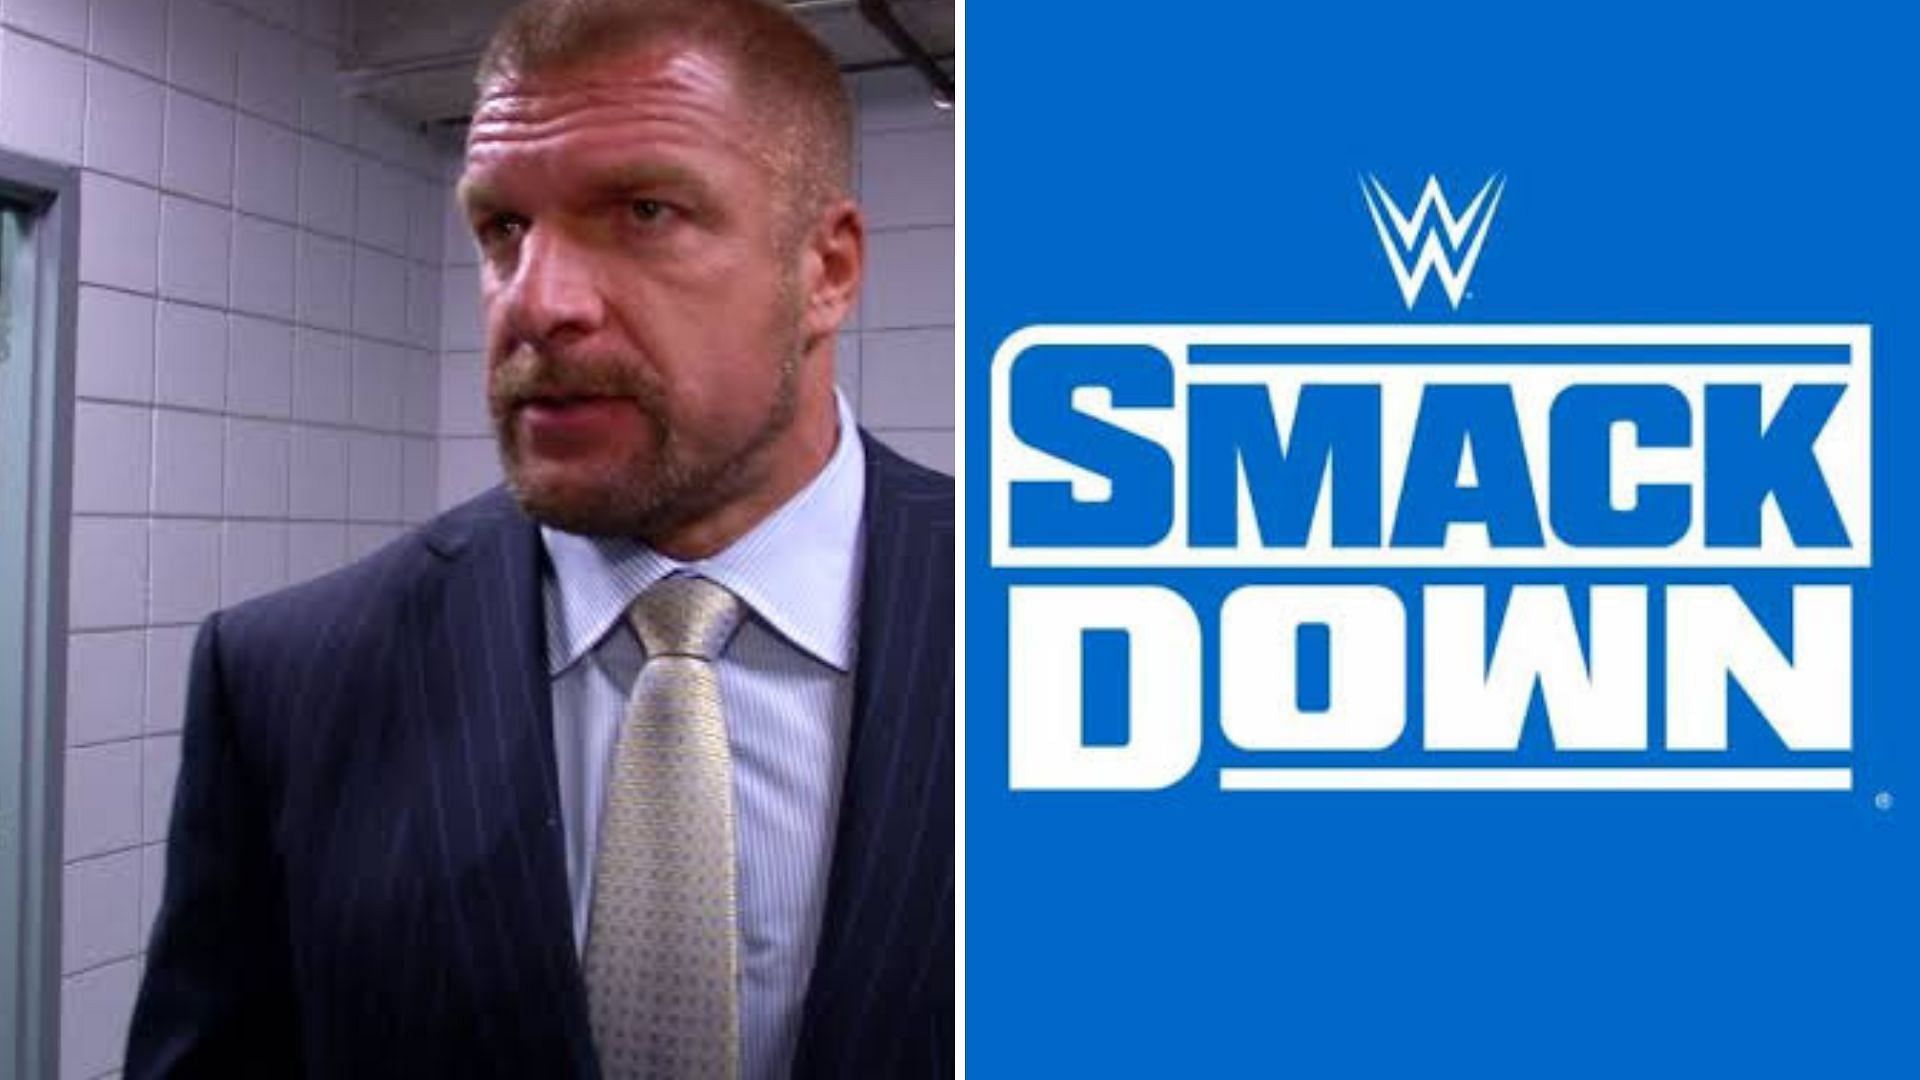 HHH has introduced many acts since coming to power.